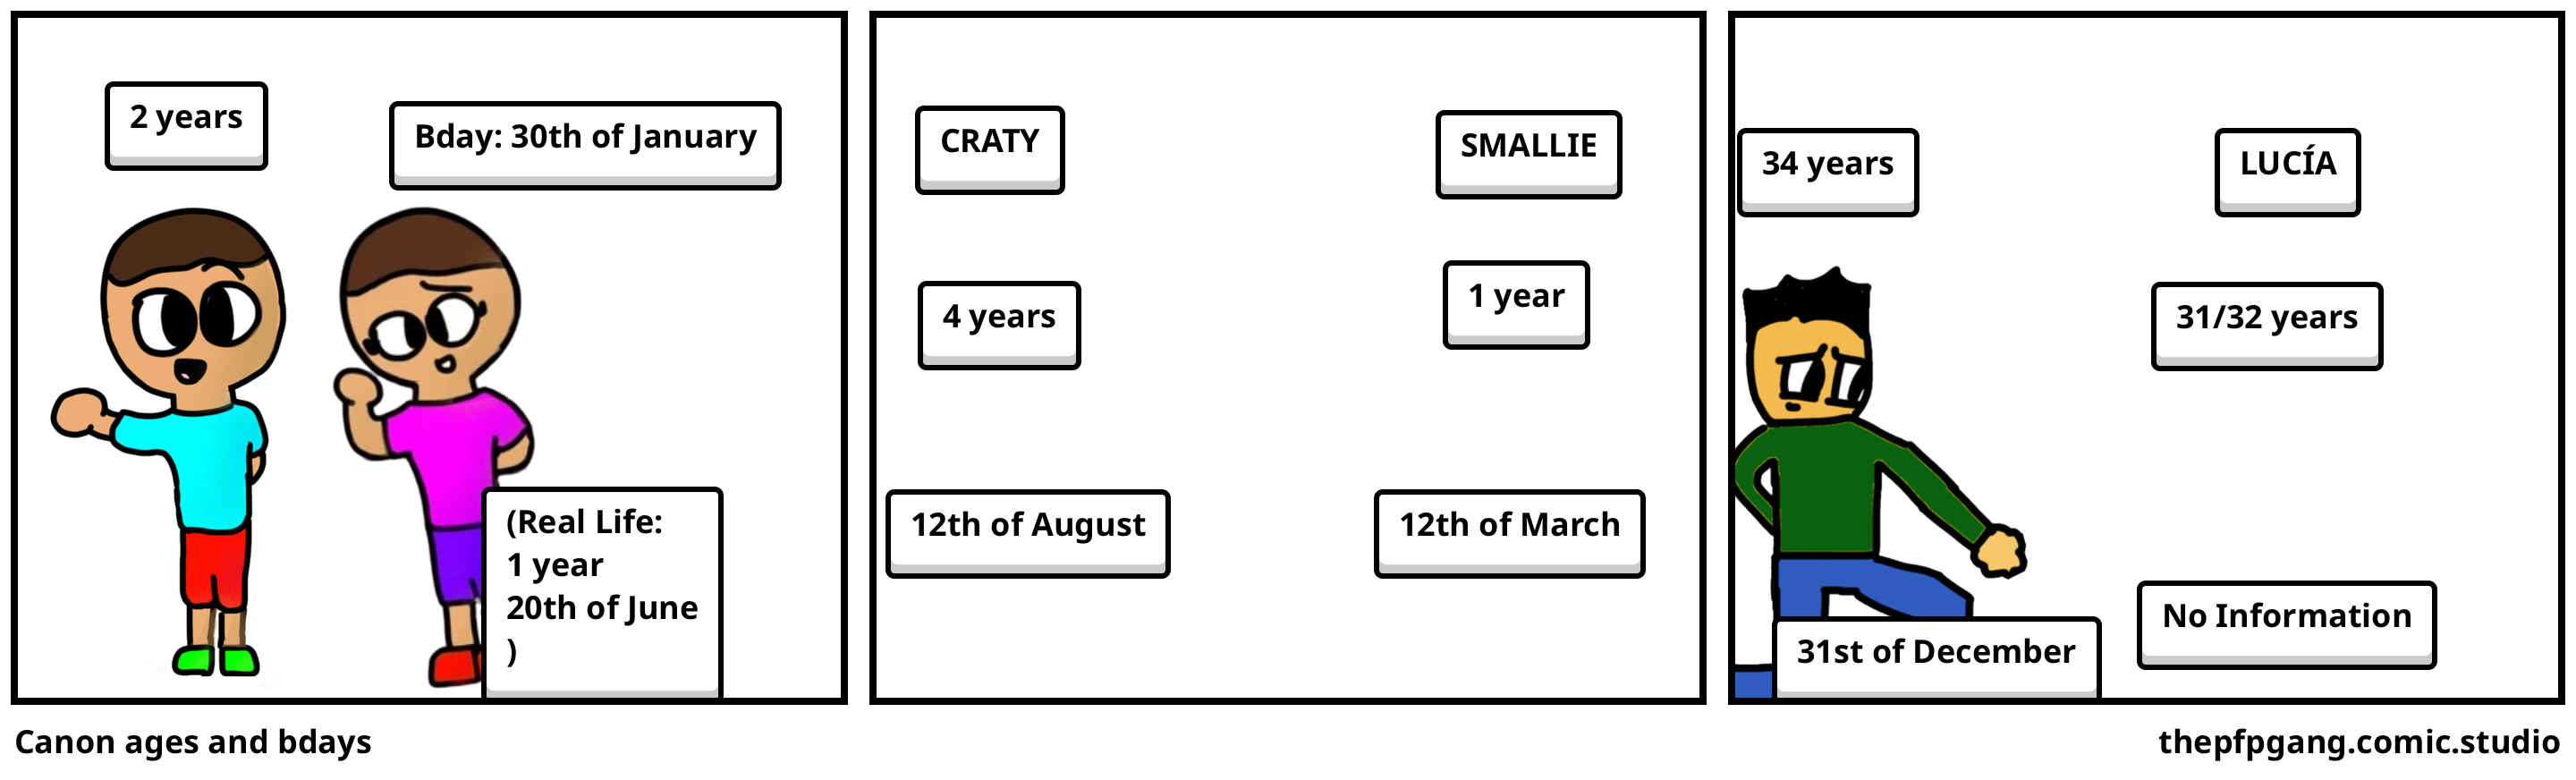 Canon ages and bdays